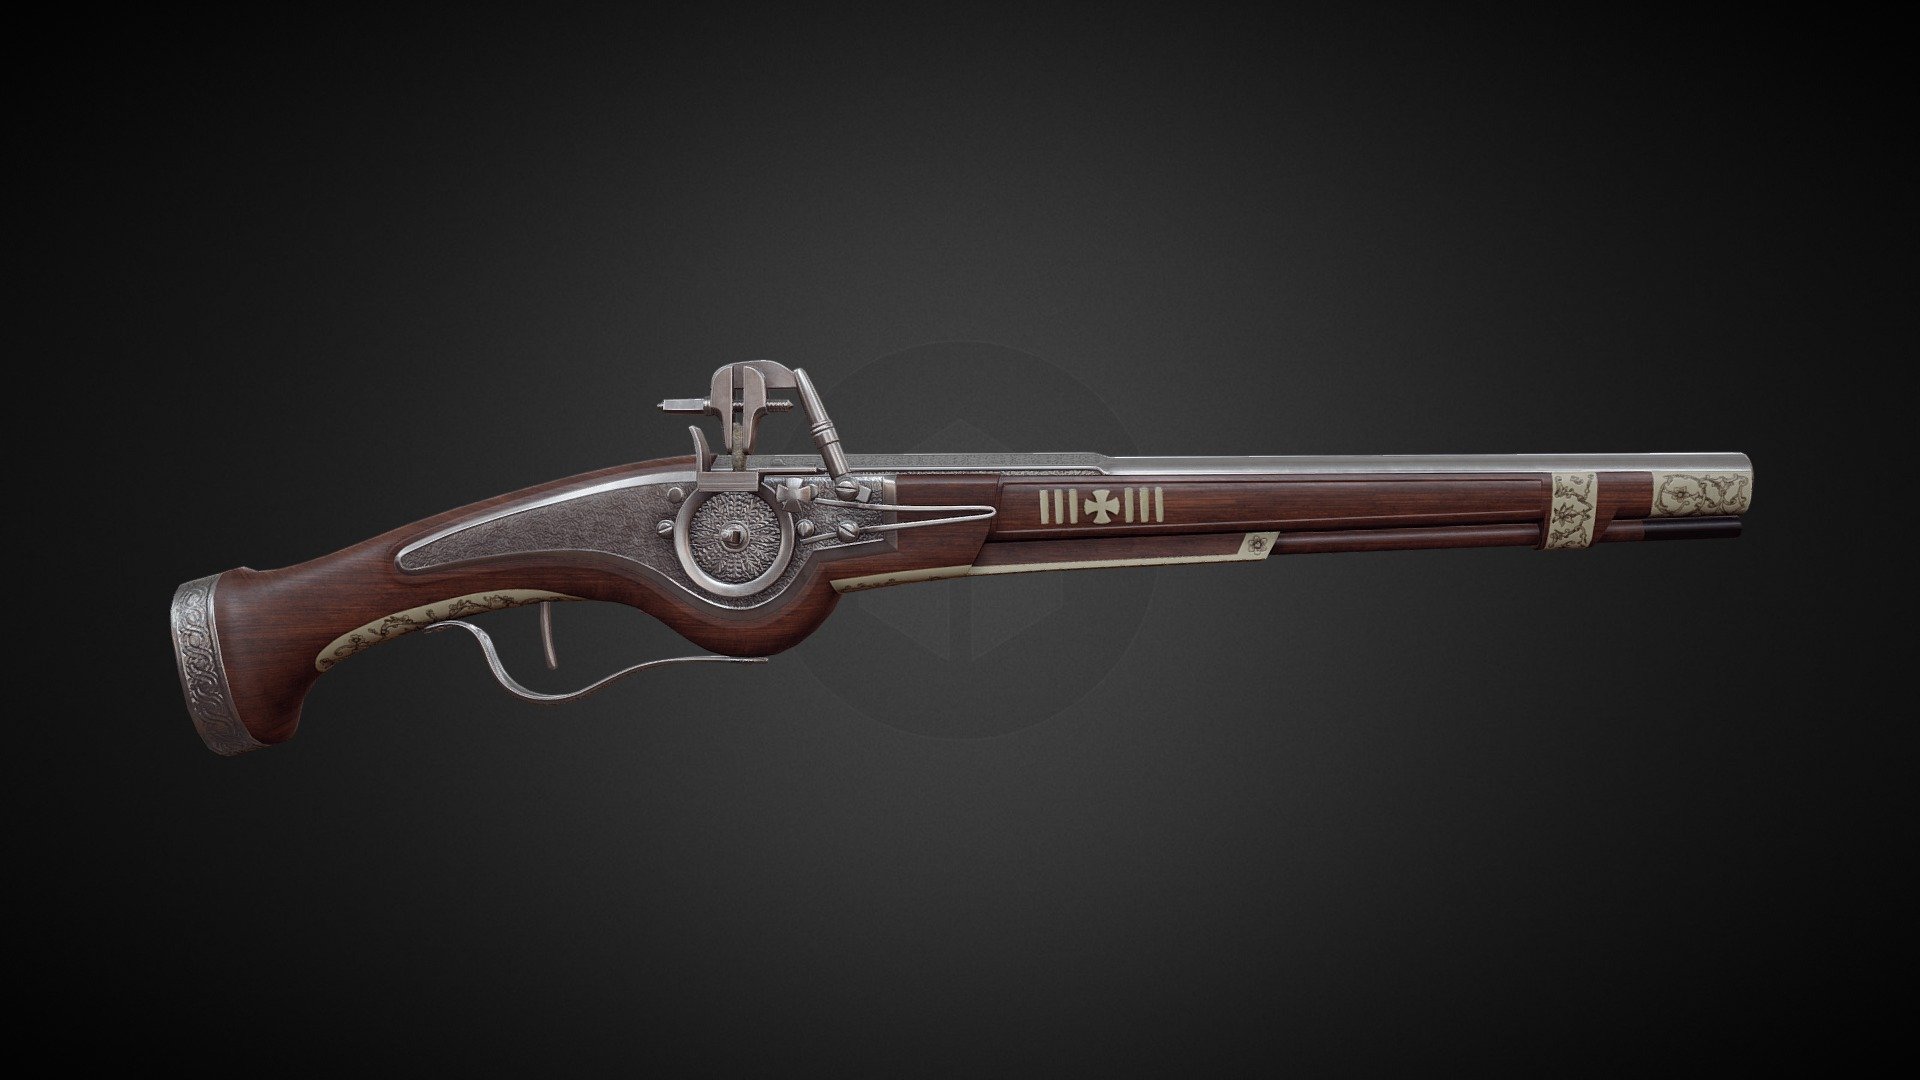 Decorated, long-barreled Wheellock Pistol used by cavalry during the 17th century.

Skeletal Low-poly, PBR. Includes High-poly files, animation.

Another version of this model: https://sketchfab.com/3d-models/17th-century-wheellock-pistol-fb4377c22133436a81f60764485b63bc

Collection of my historical models: https://sketchfab.com/avatrass/collections/historical-item-models - 17th century Wheellock Pistol [Animated] - Buy Royalty Free 3D model by avatrass 3d model